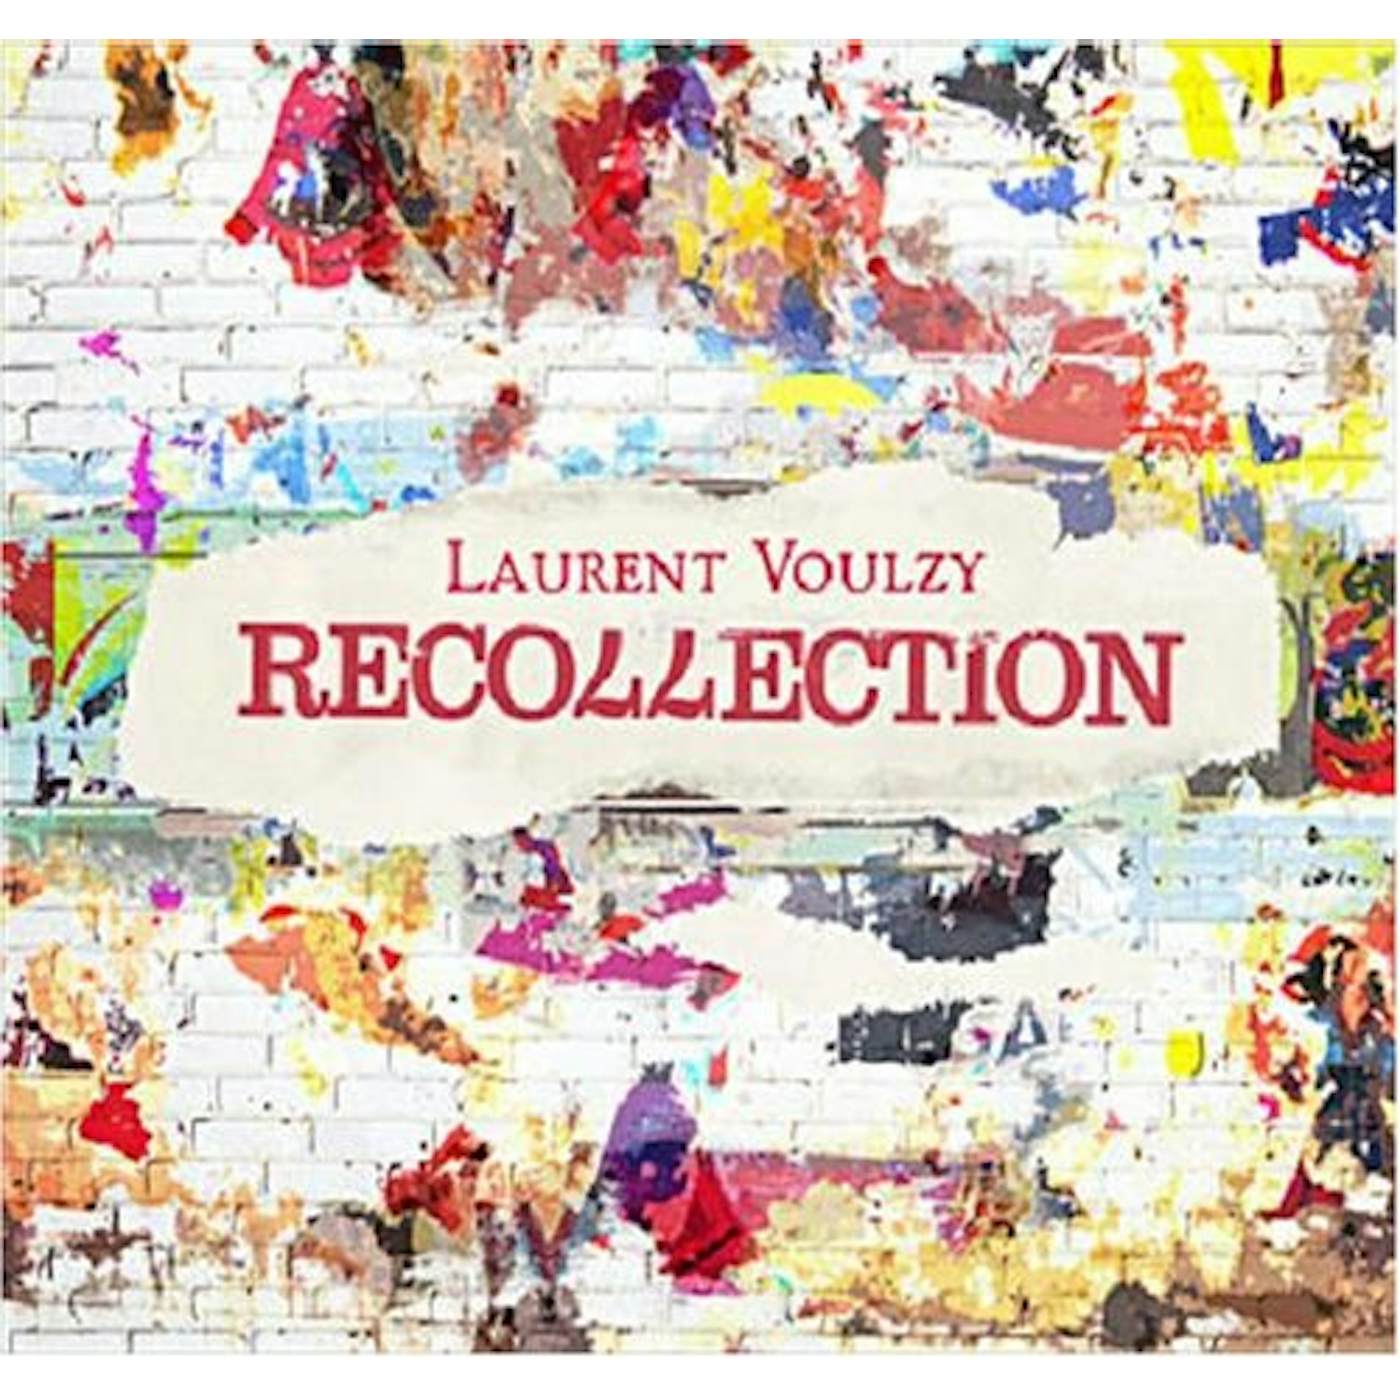 Laurent Voulzy RECOLLECTION CD